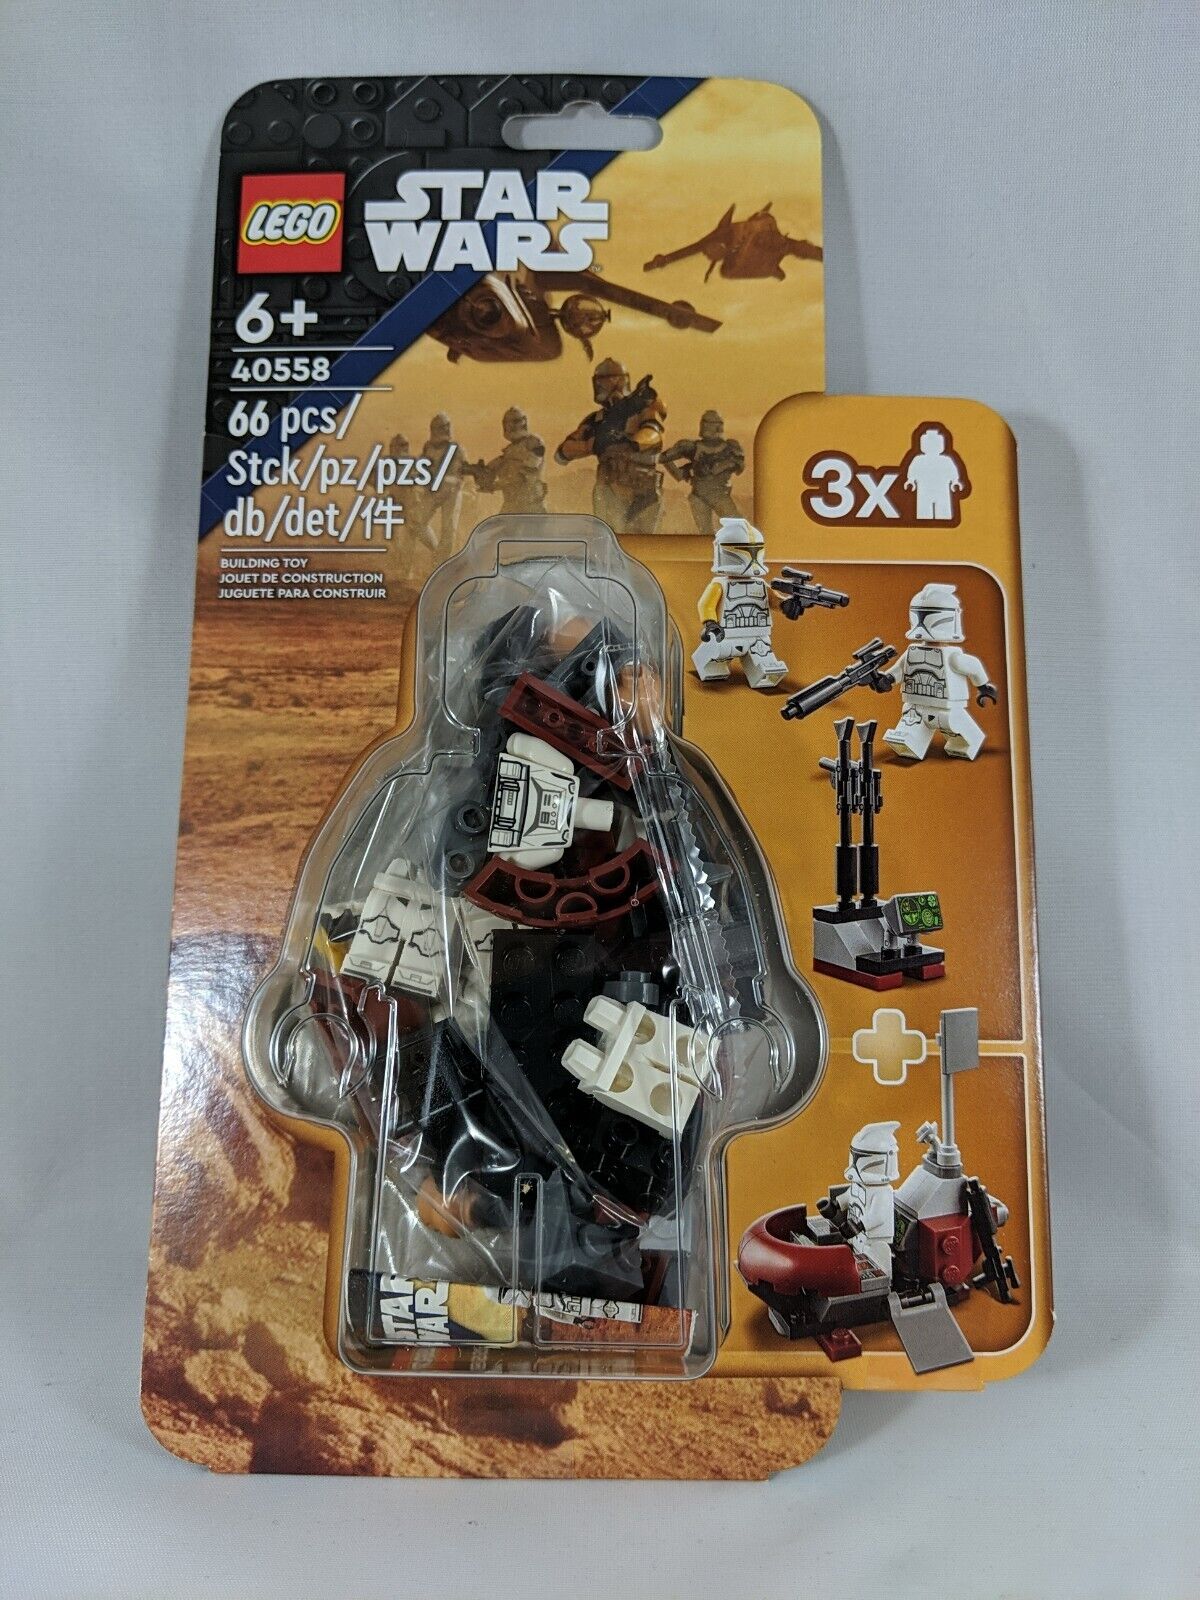 LEGO STAR WARS 40558 CLONE TROOPER COMMAND STATION NEW SEALED HARD TO FIND